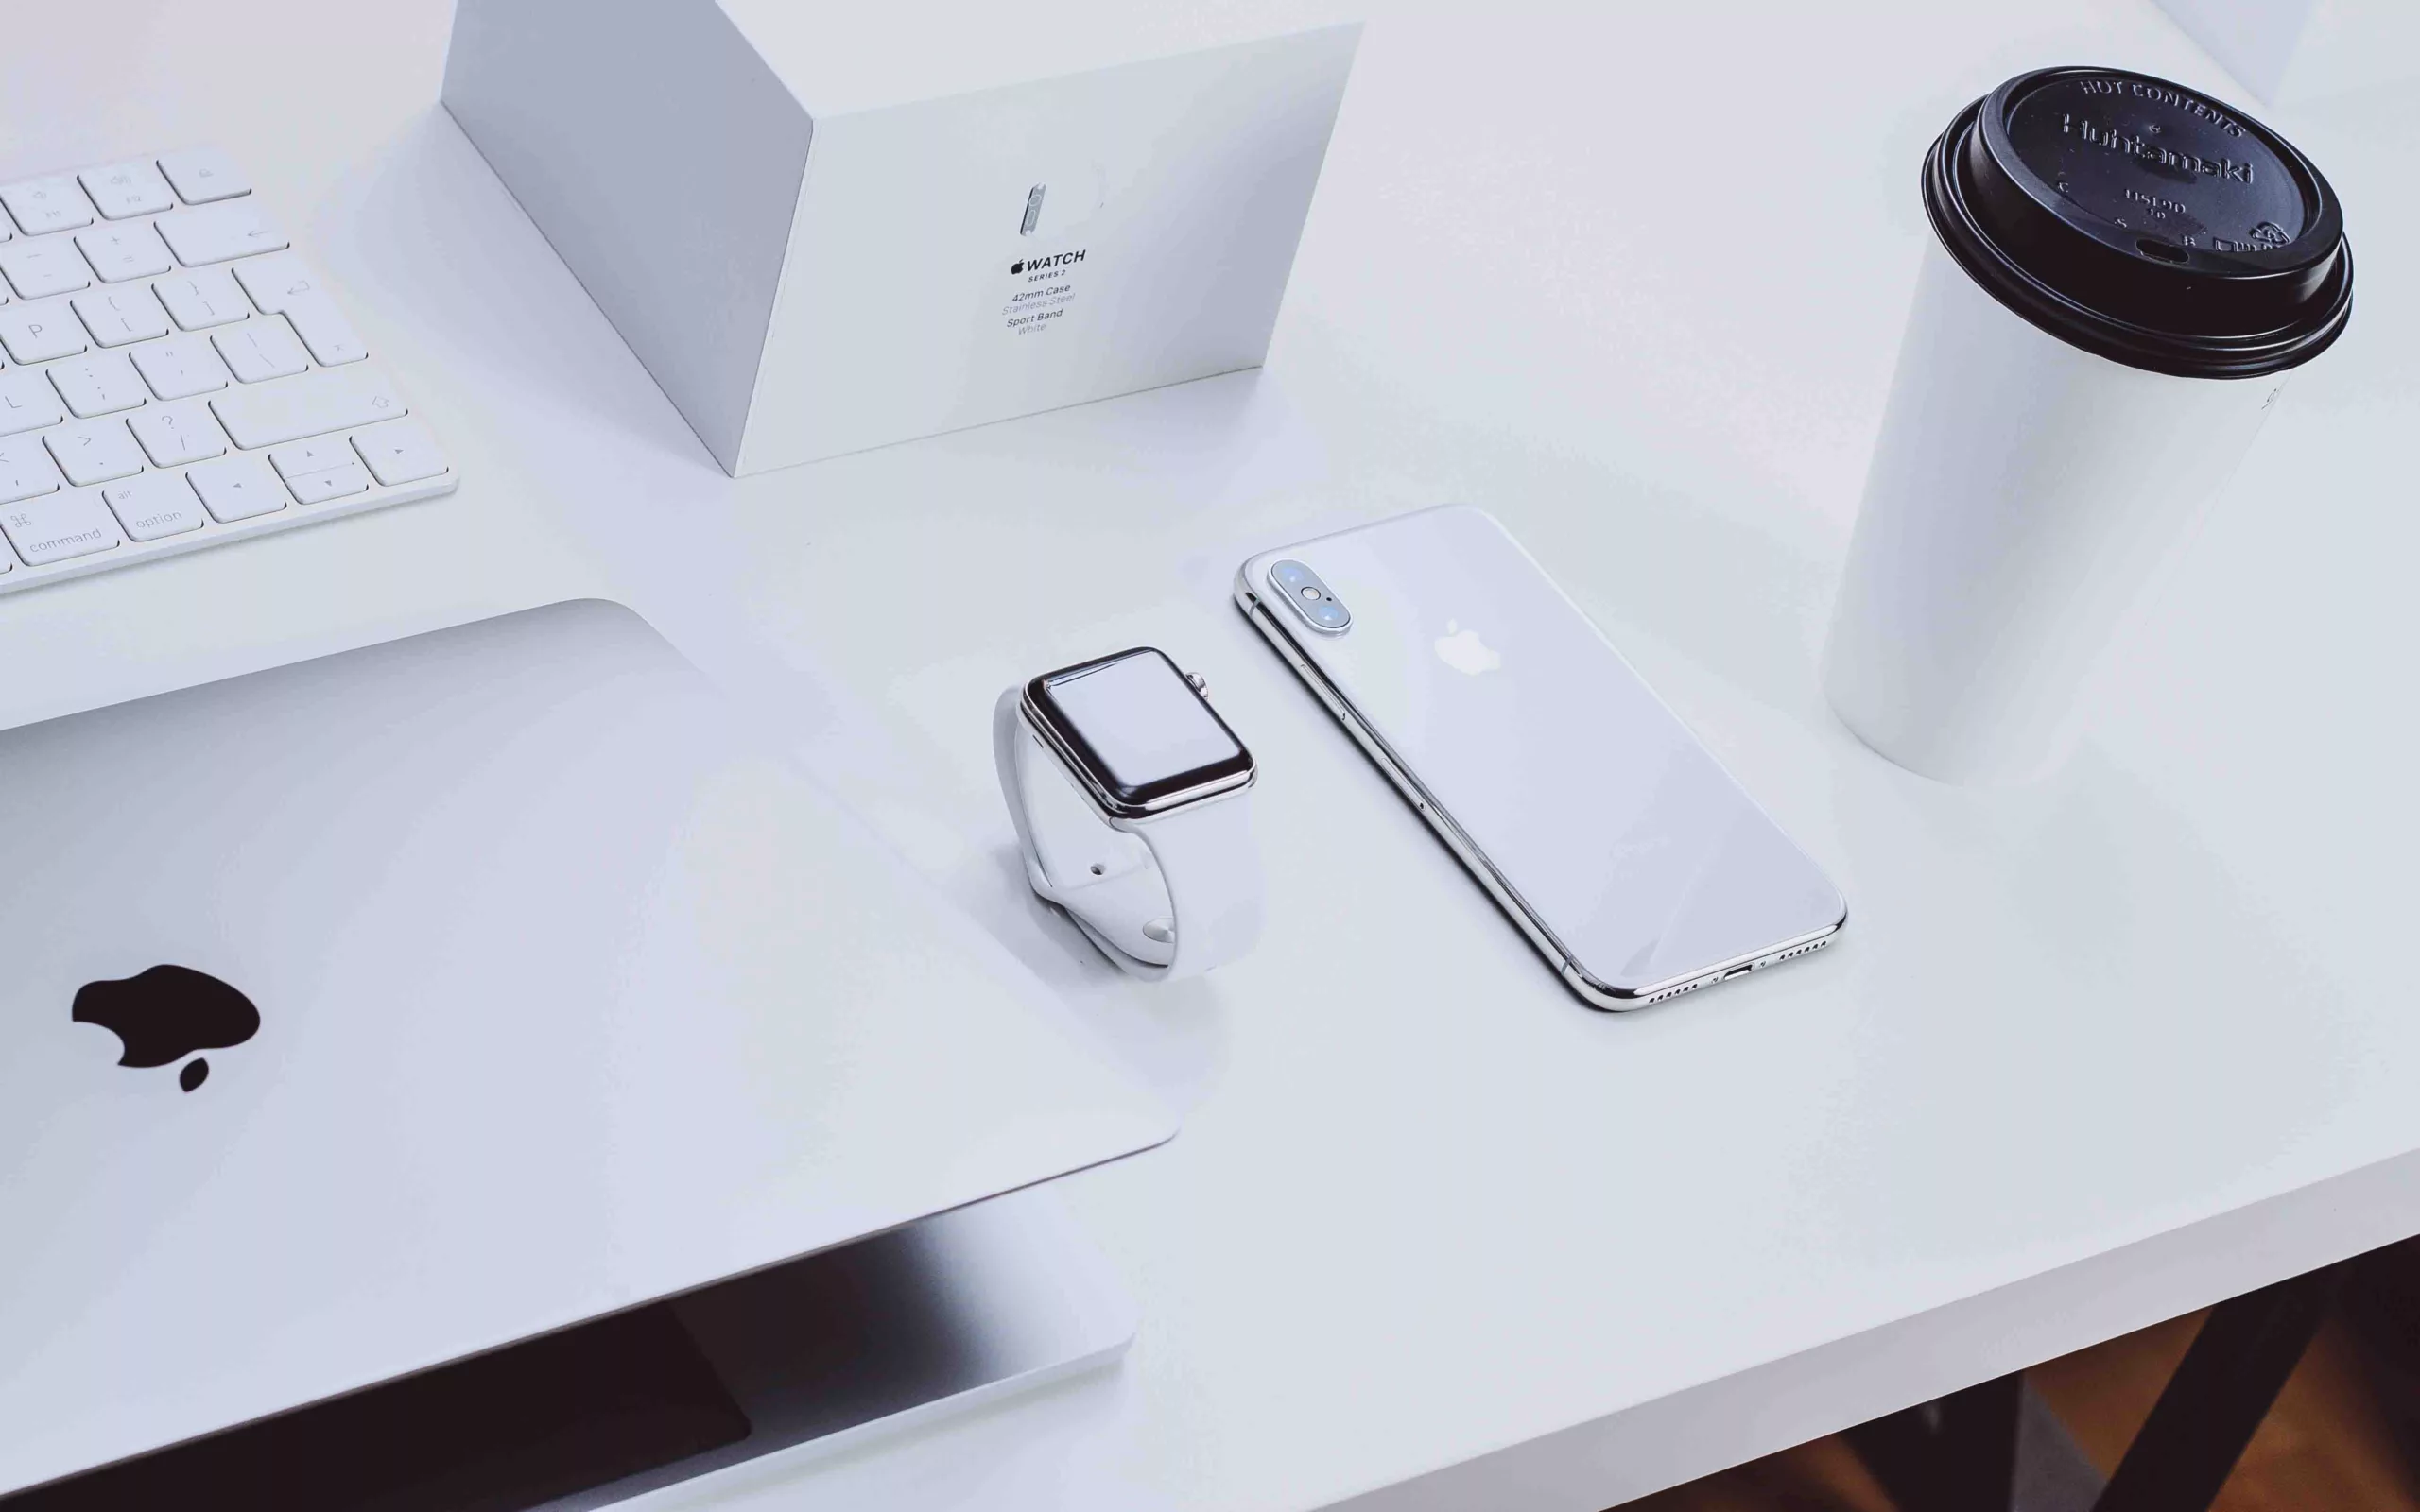 Modern workspace with Apple devices